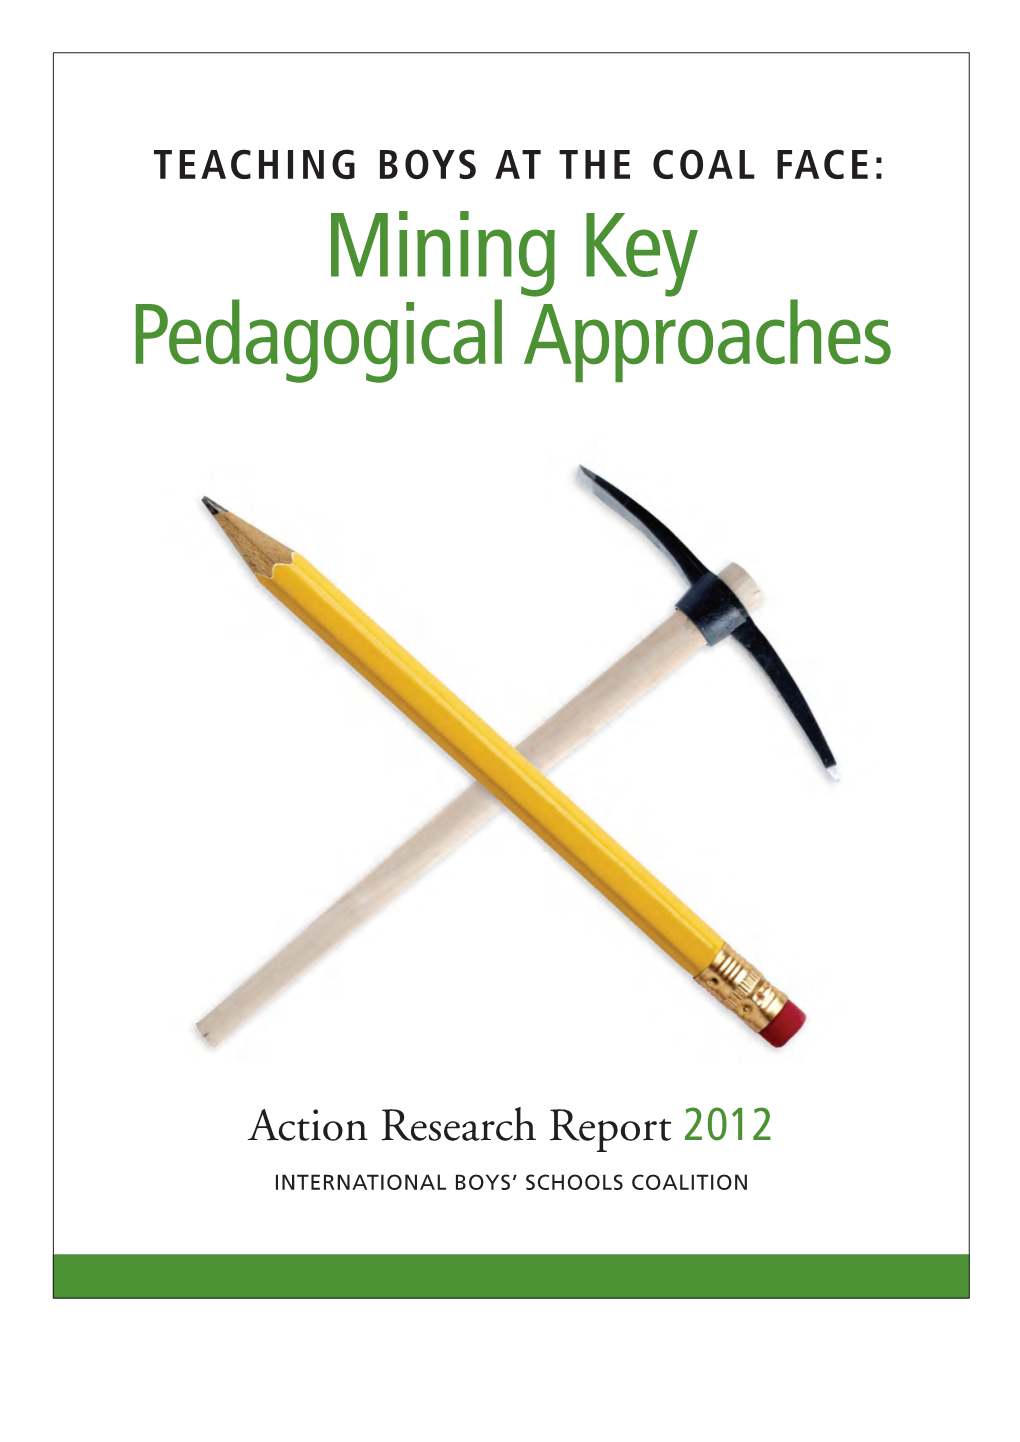 In the Action Research Report 2012